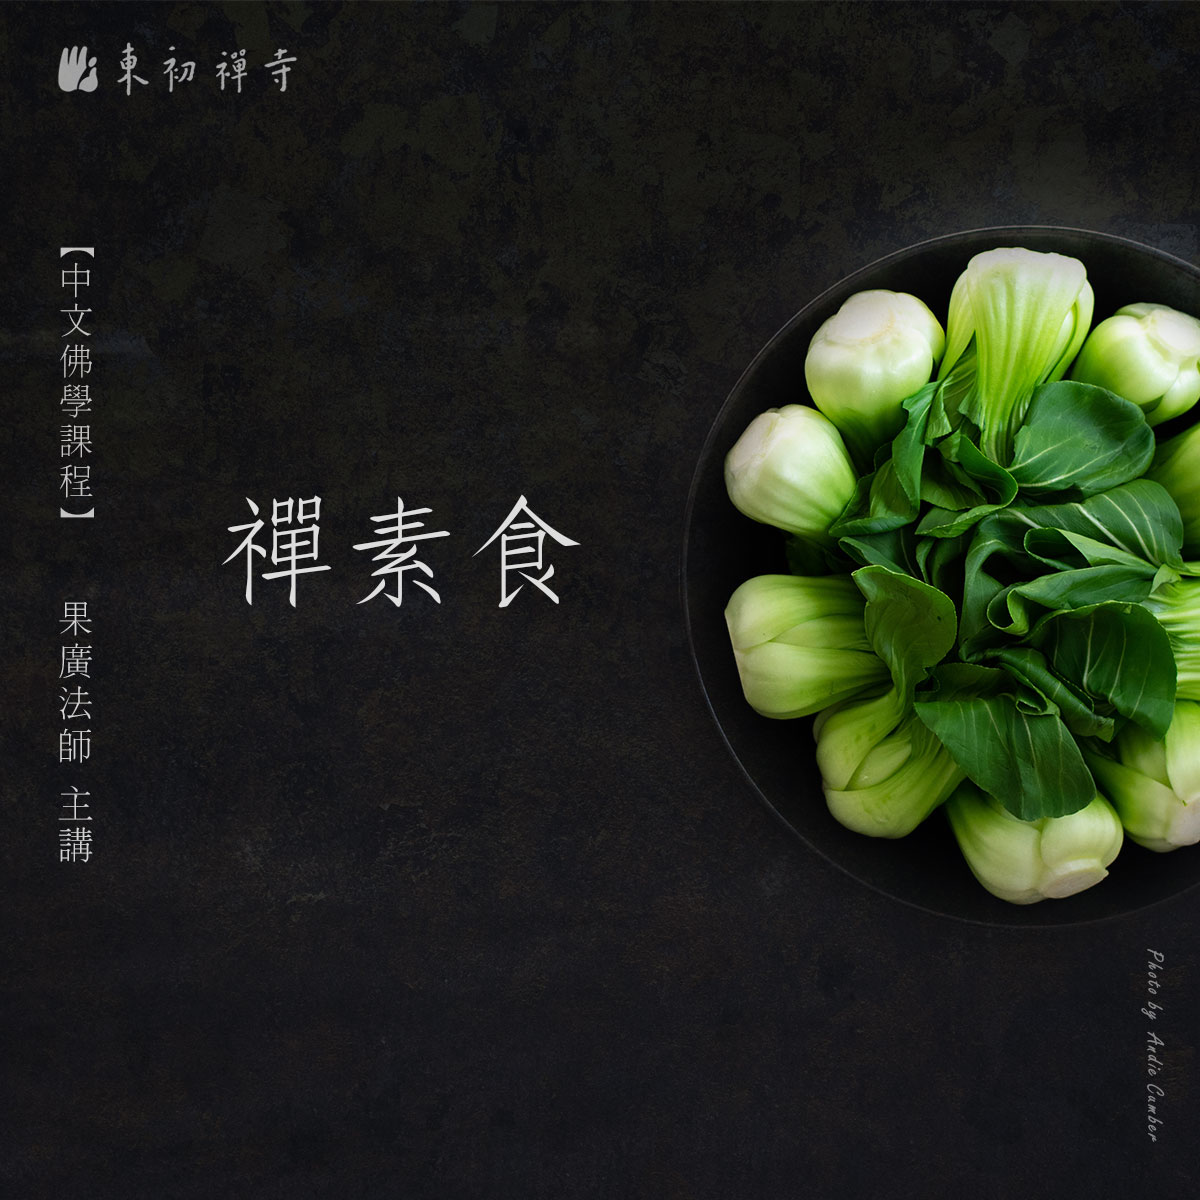 (In Chinese)-Online Chinese Dharma Class -<br />
【Vegetarian Chan】